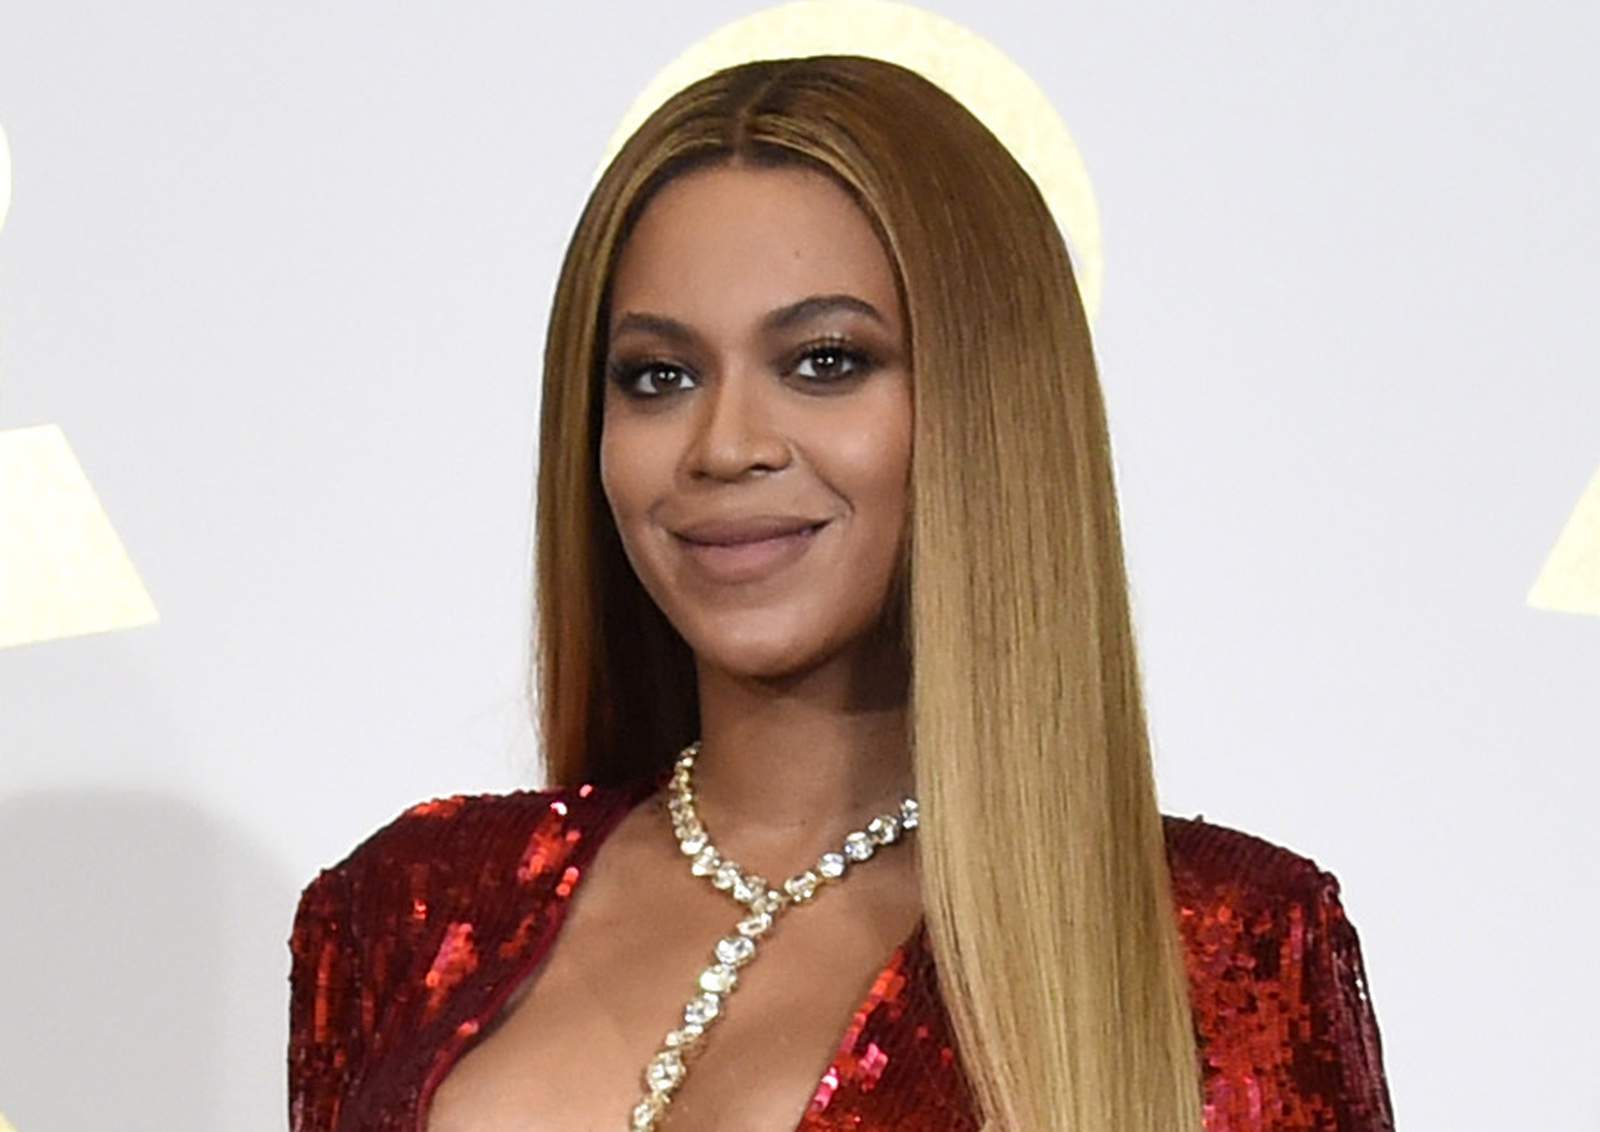 A 'Black Parade' Grammys: Beyoncé leads with 9 nominations